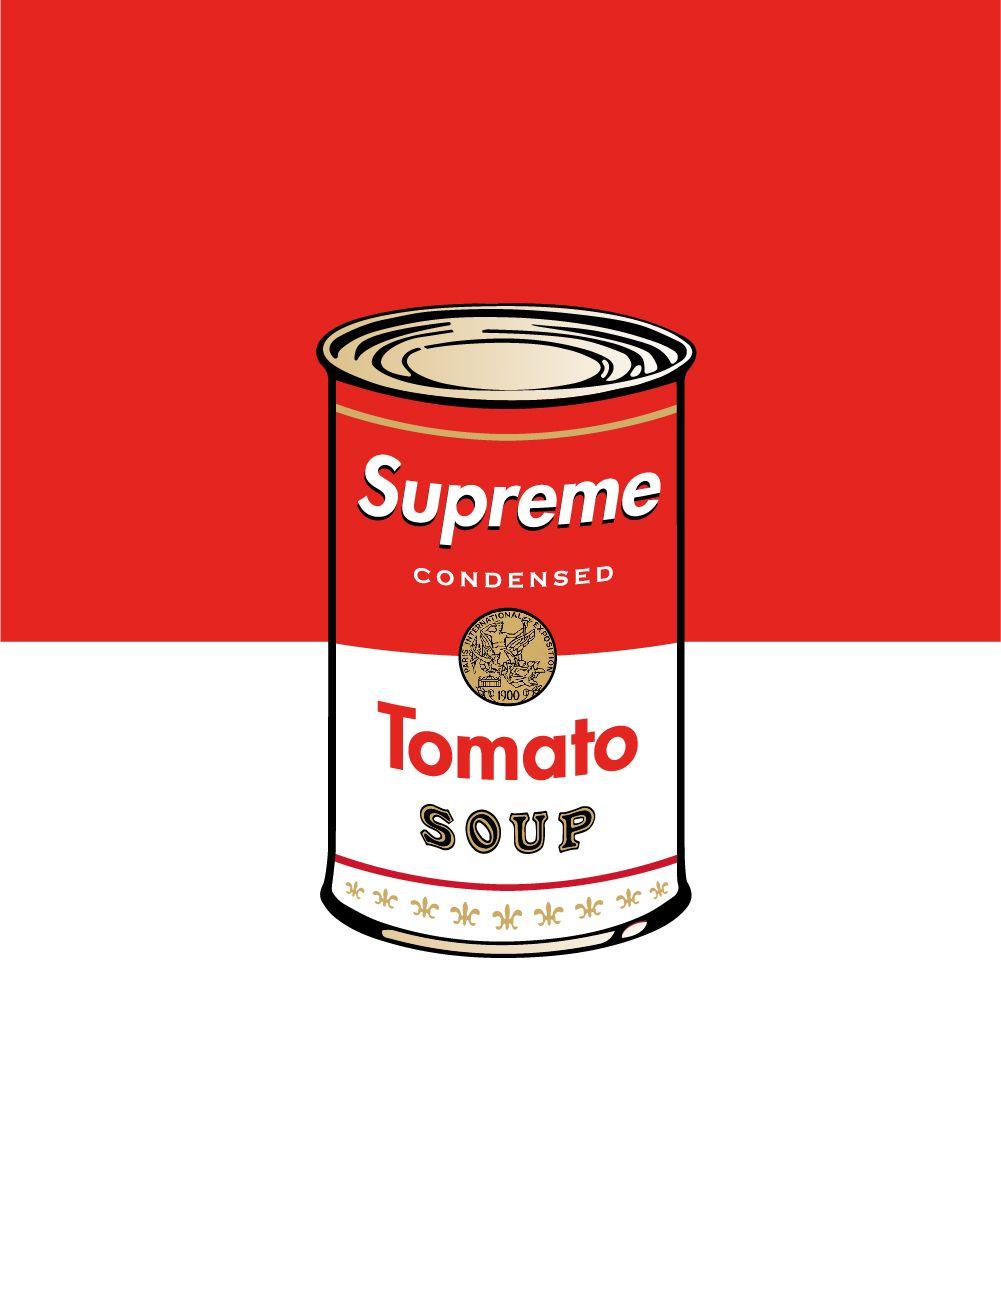 Andy Warhol's Can of Soup x Supreme Popart